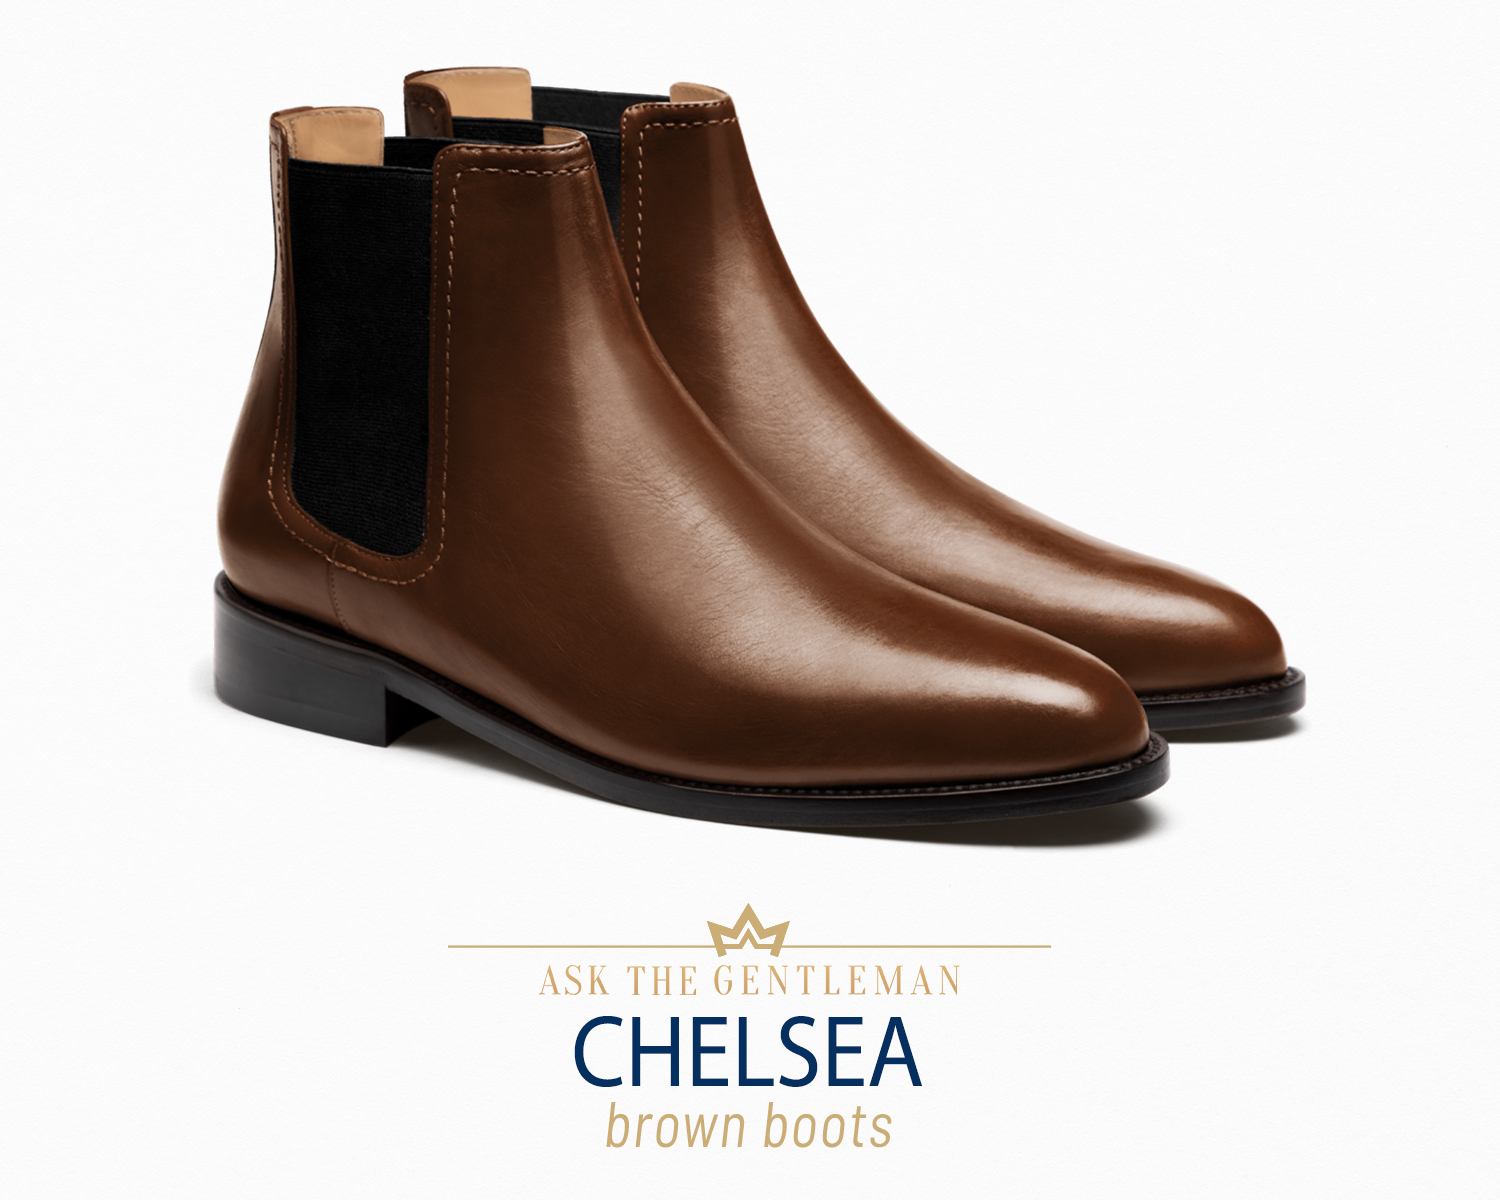 The Chelsea boot type